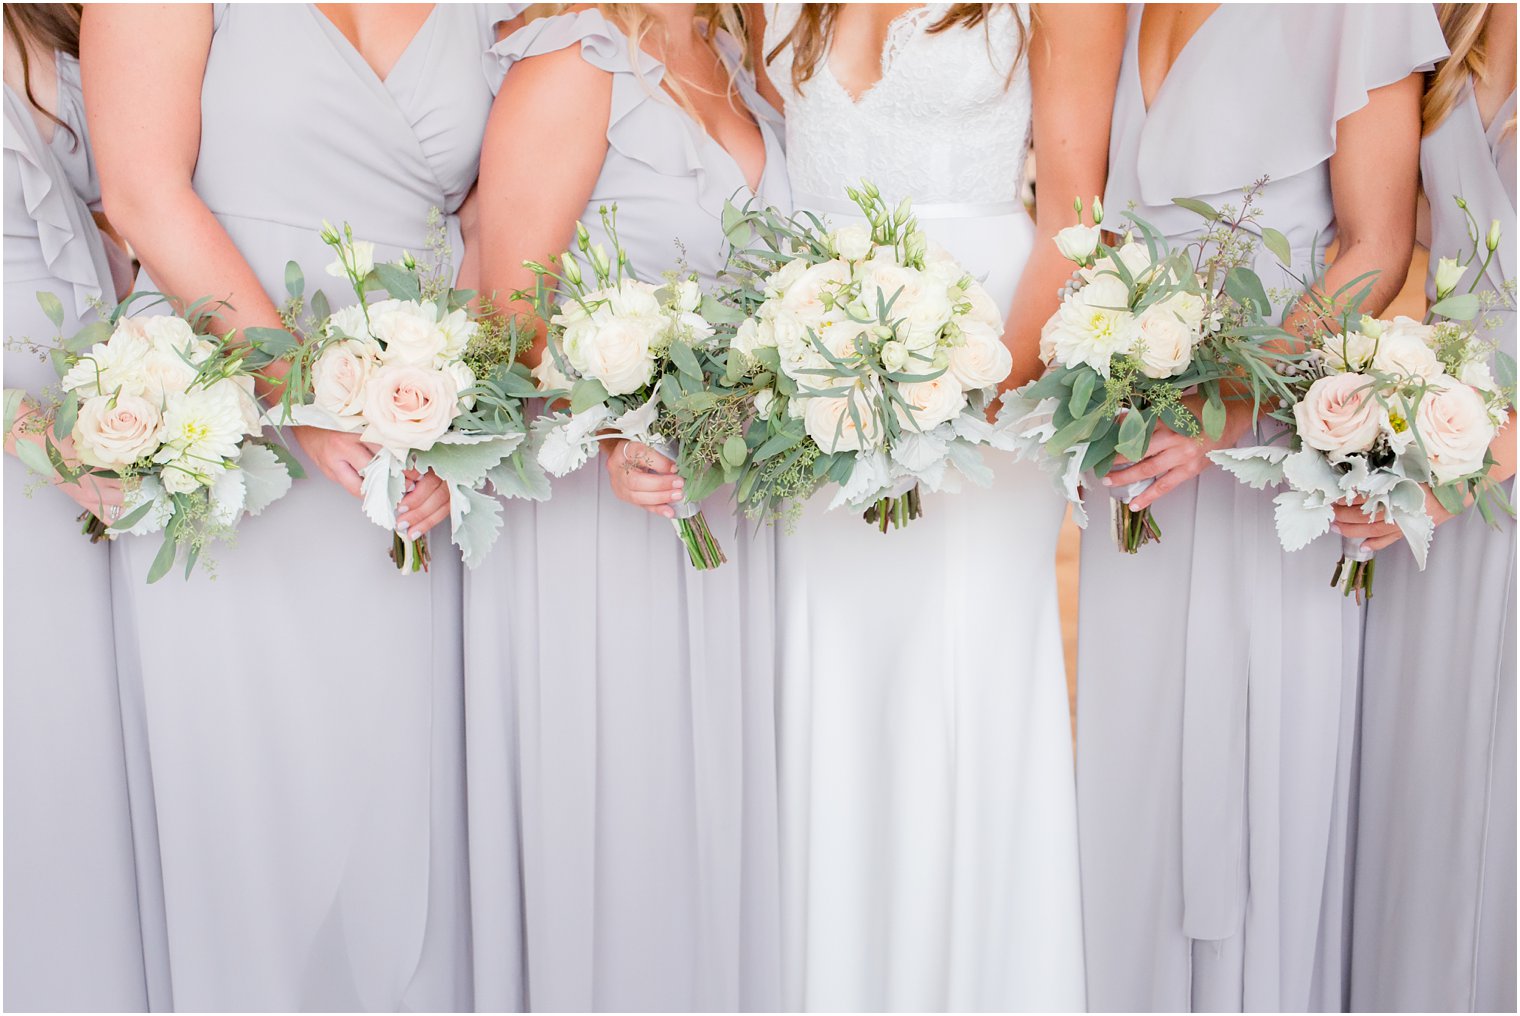 ivory and green wedding bouquets by Meghan Pinsky for Jasna Polana NJ wedding